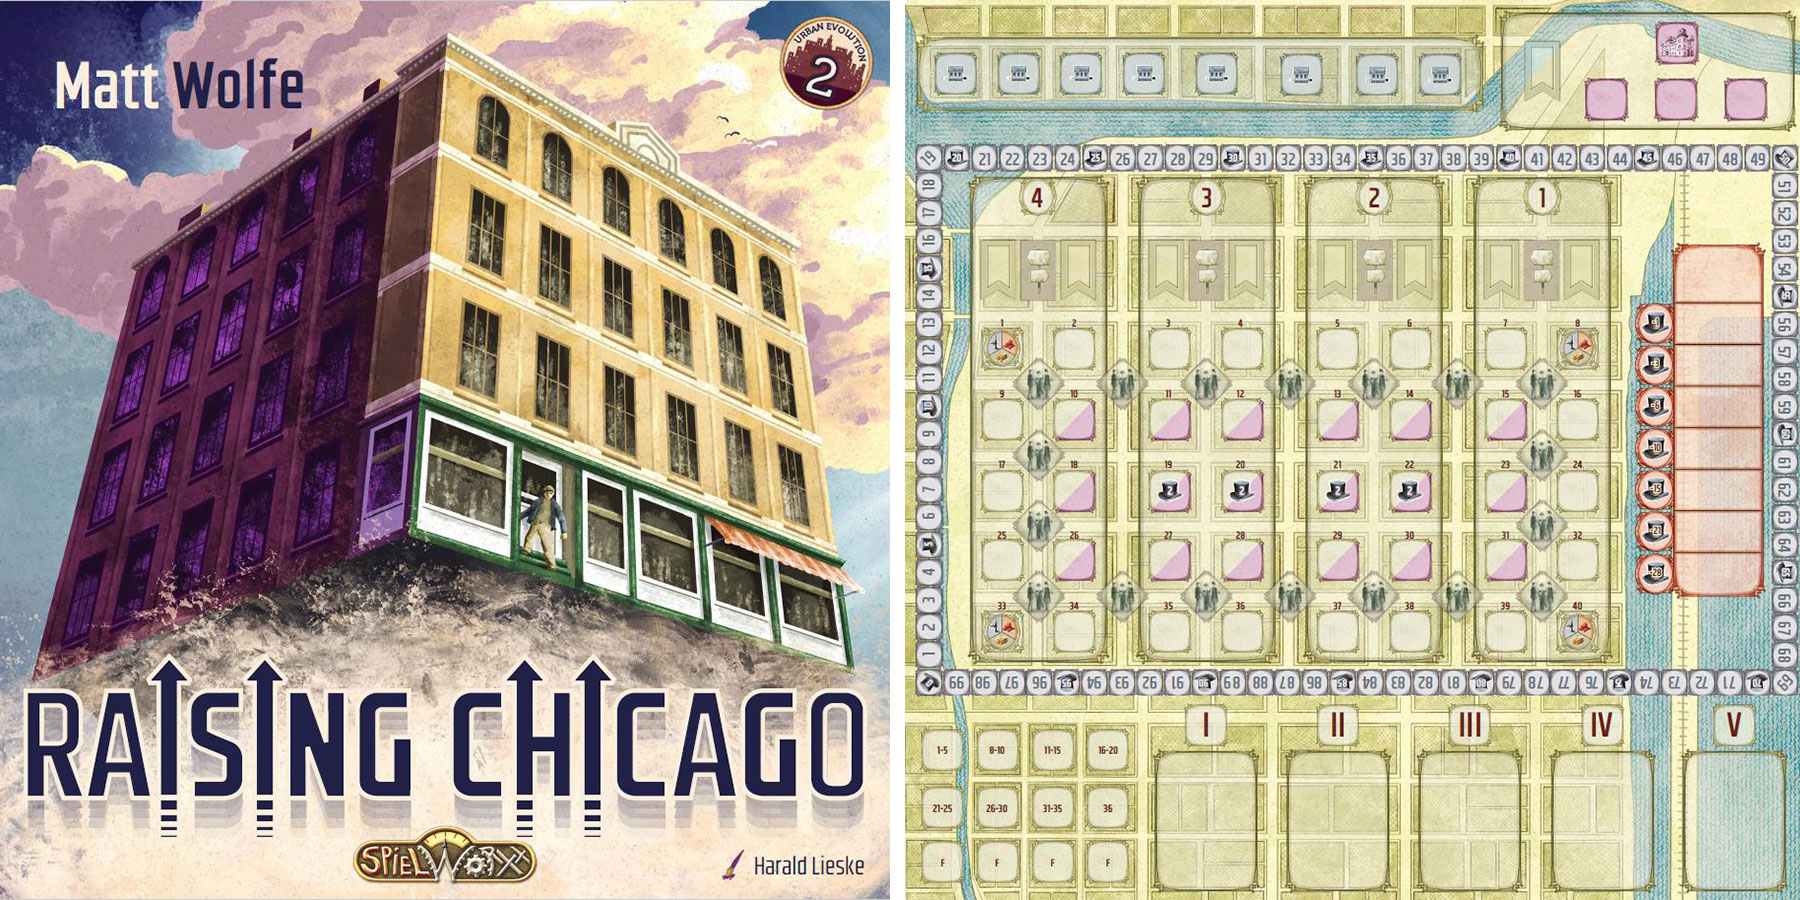 Side by side pictures of the Raising Chicago board game and the board itself.